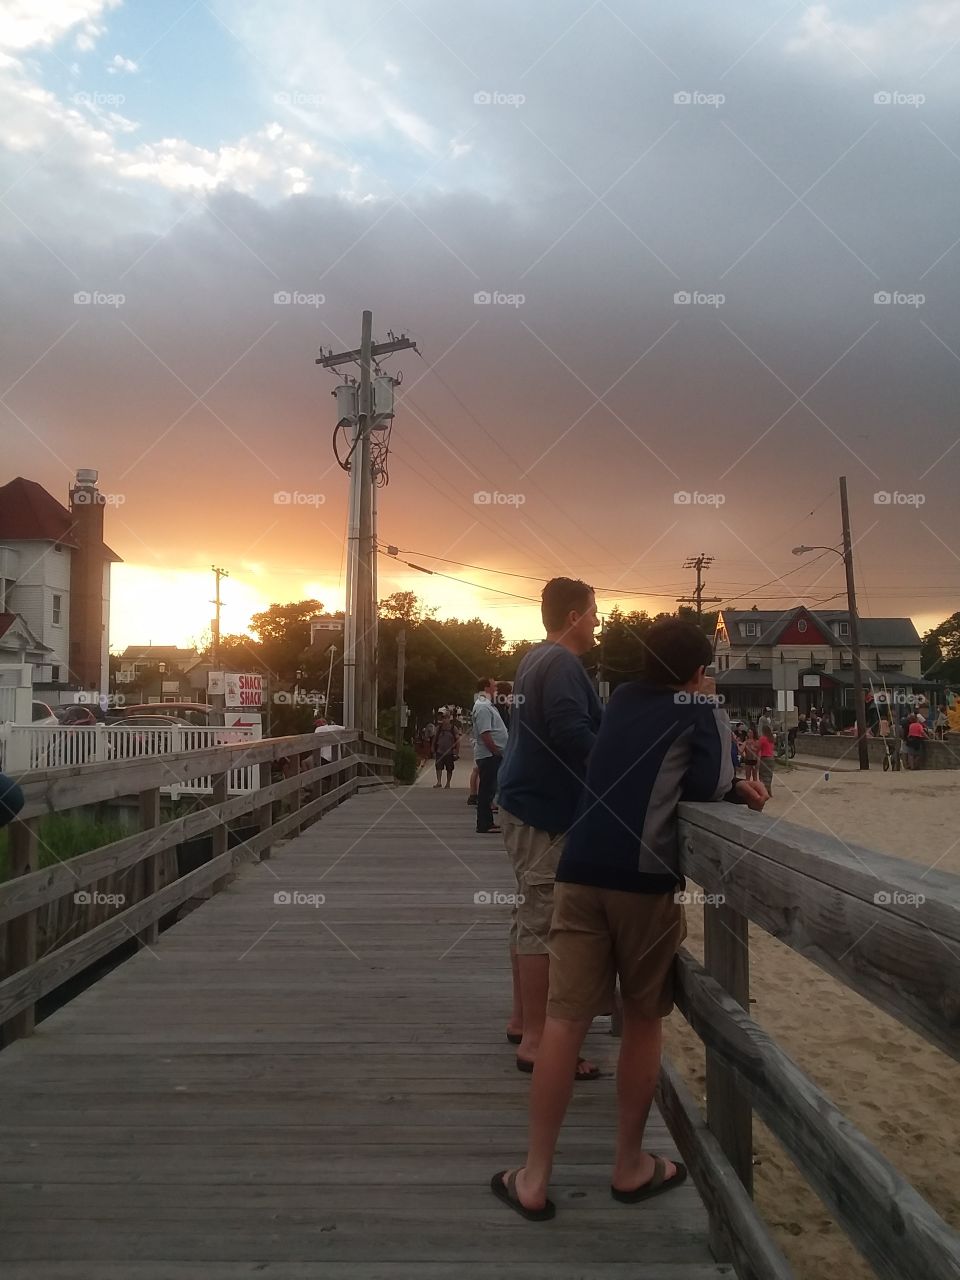 Stormy skies and sunset at beach concert in N.J.